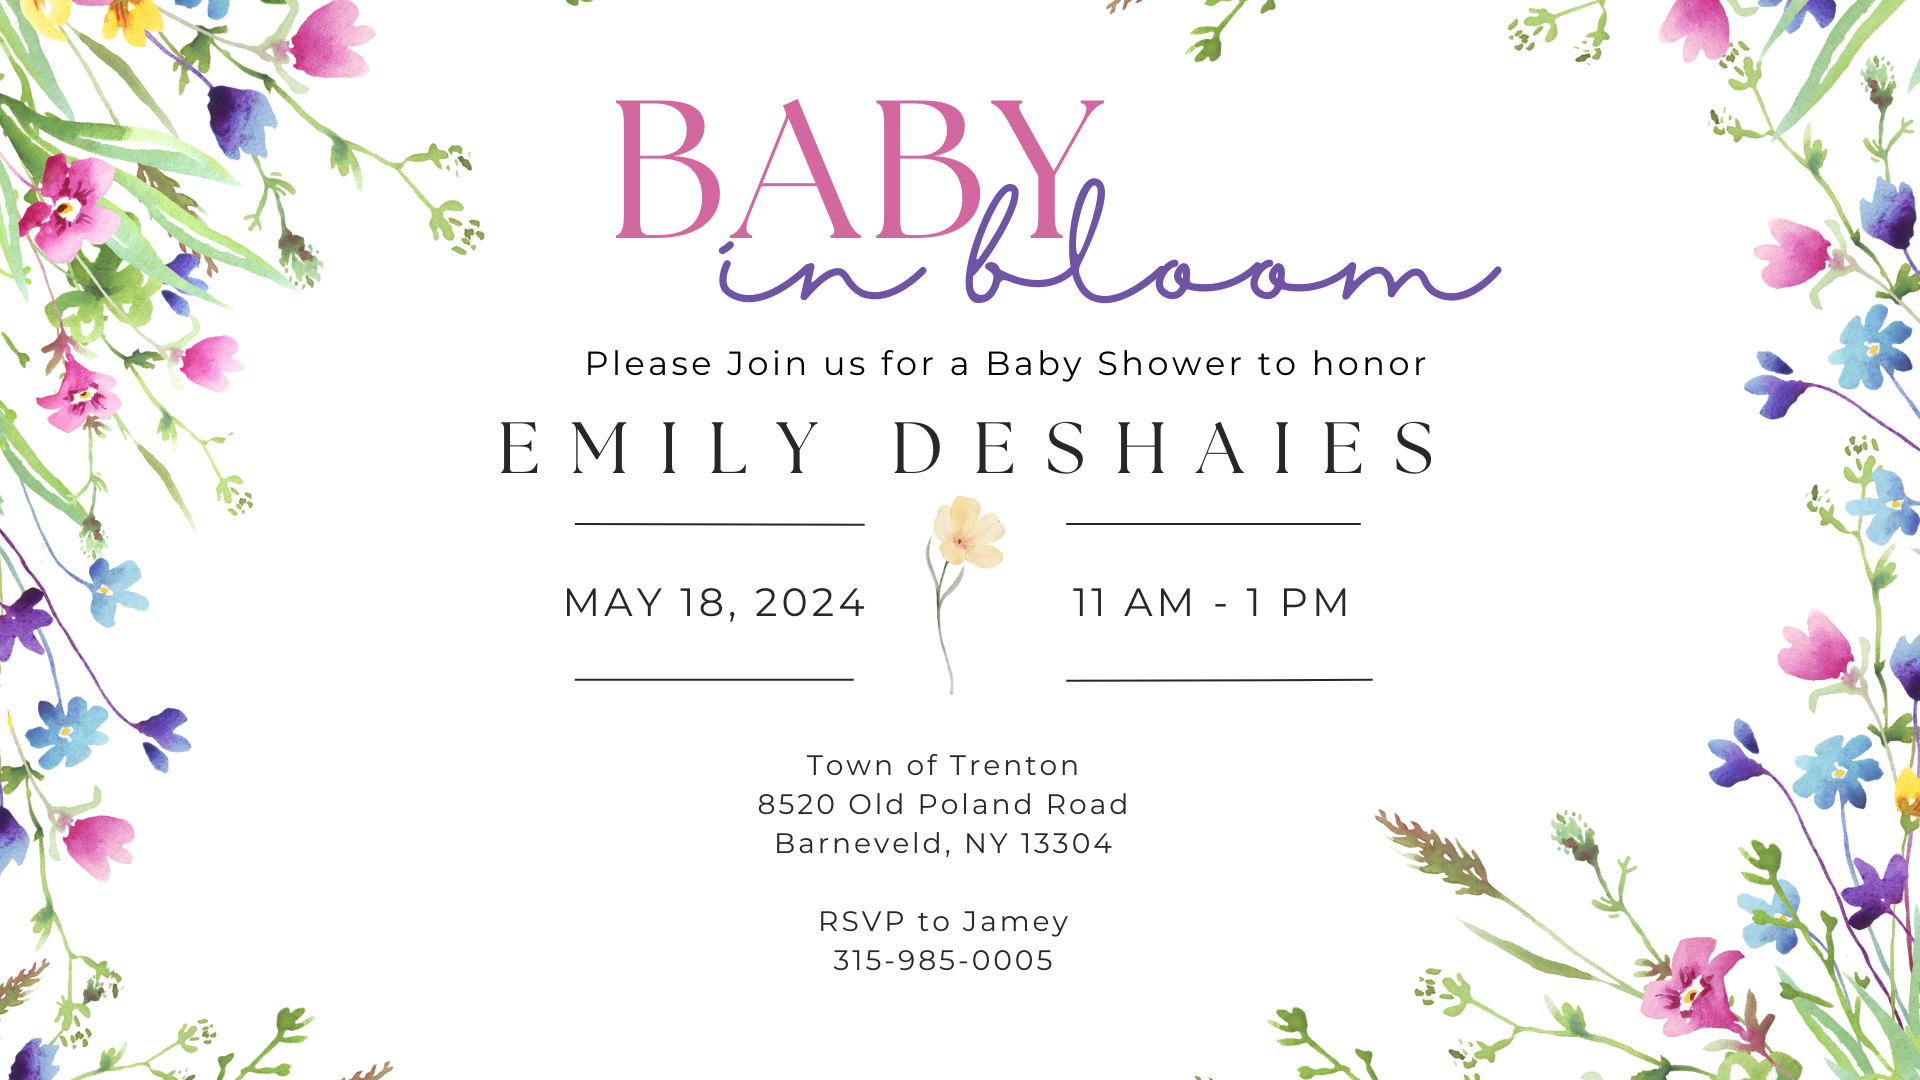 Baby Shower for Emily Deshaies @ Town of Trenton